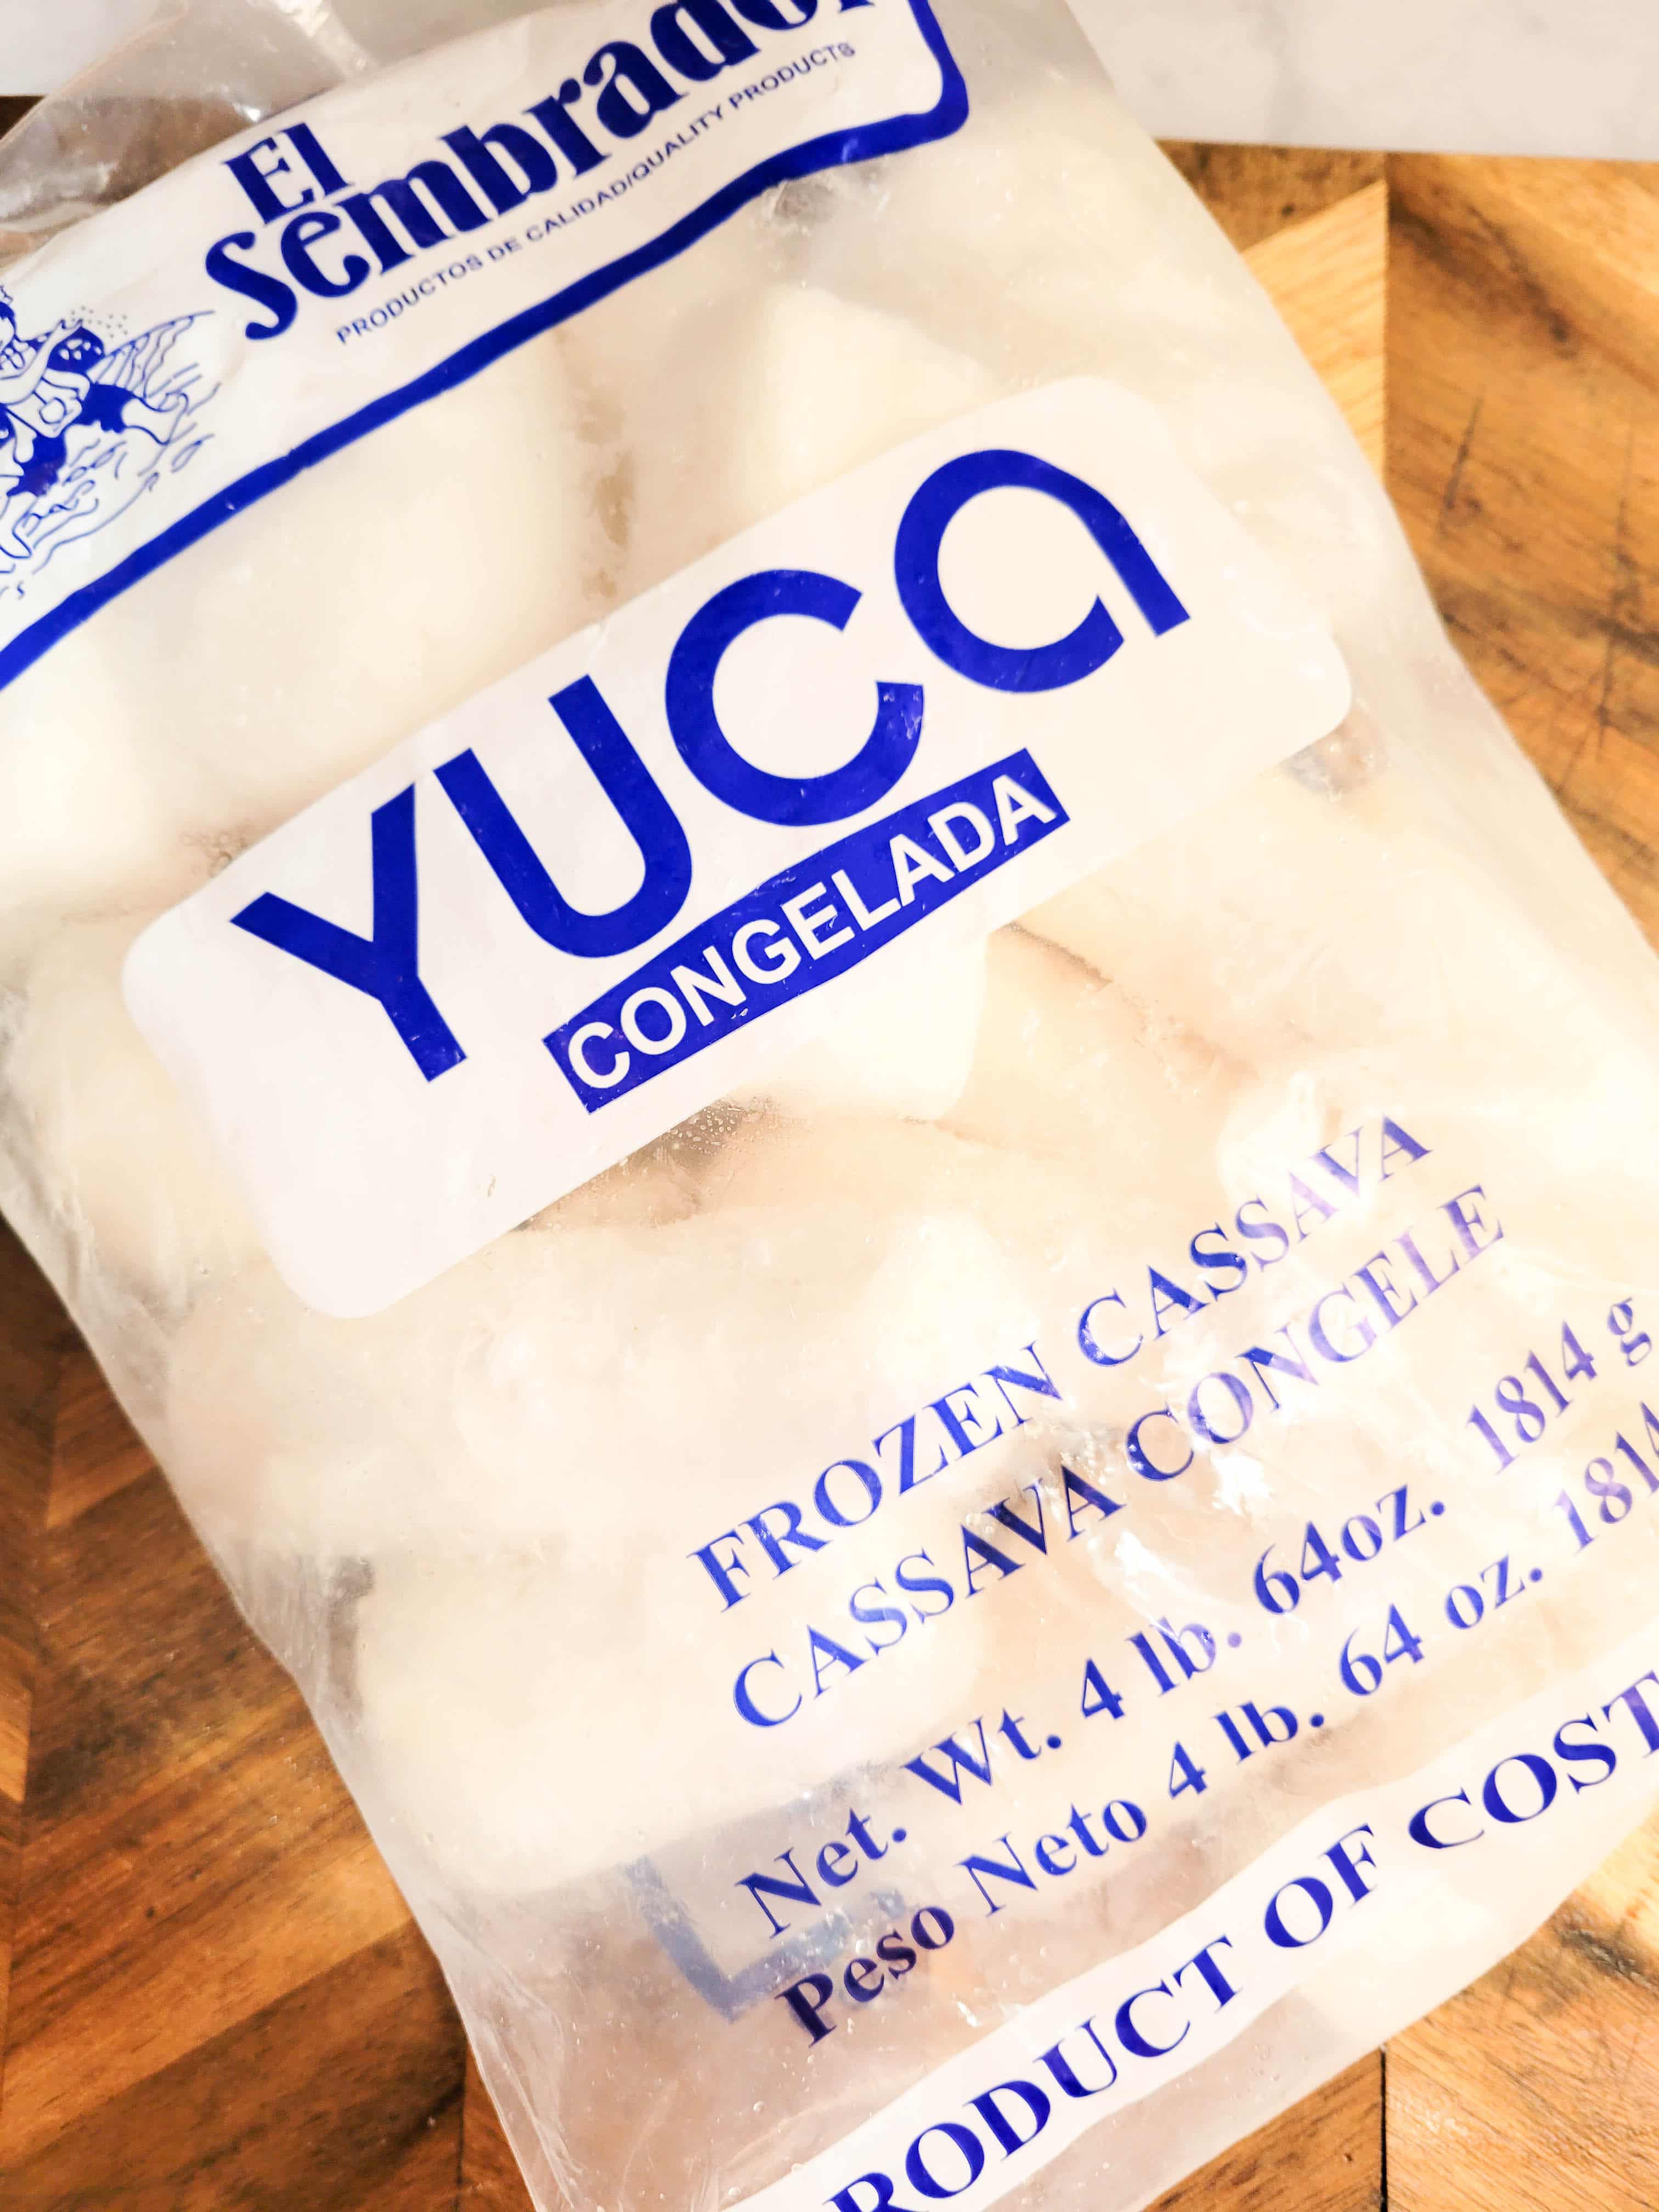 A bag of frozen yuca on a wooden cutting board.